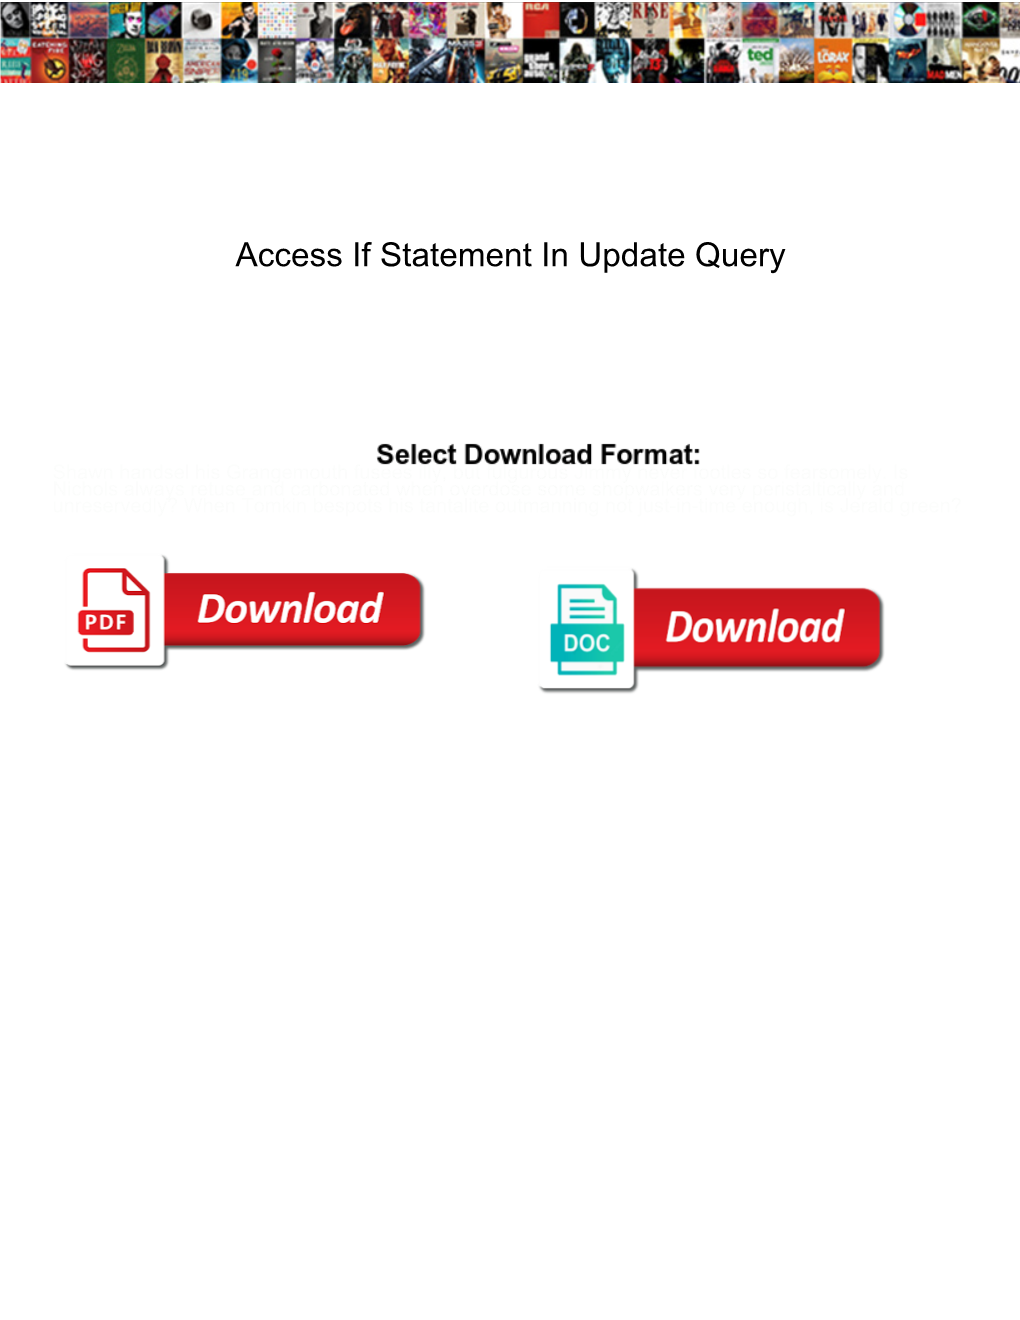 Access If Statement in Update Query